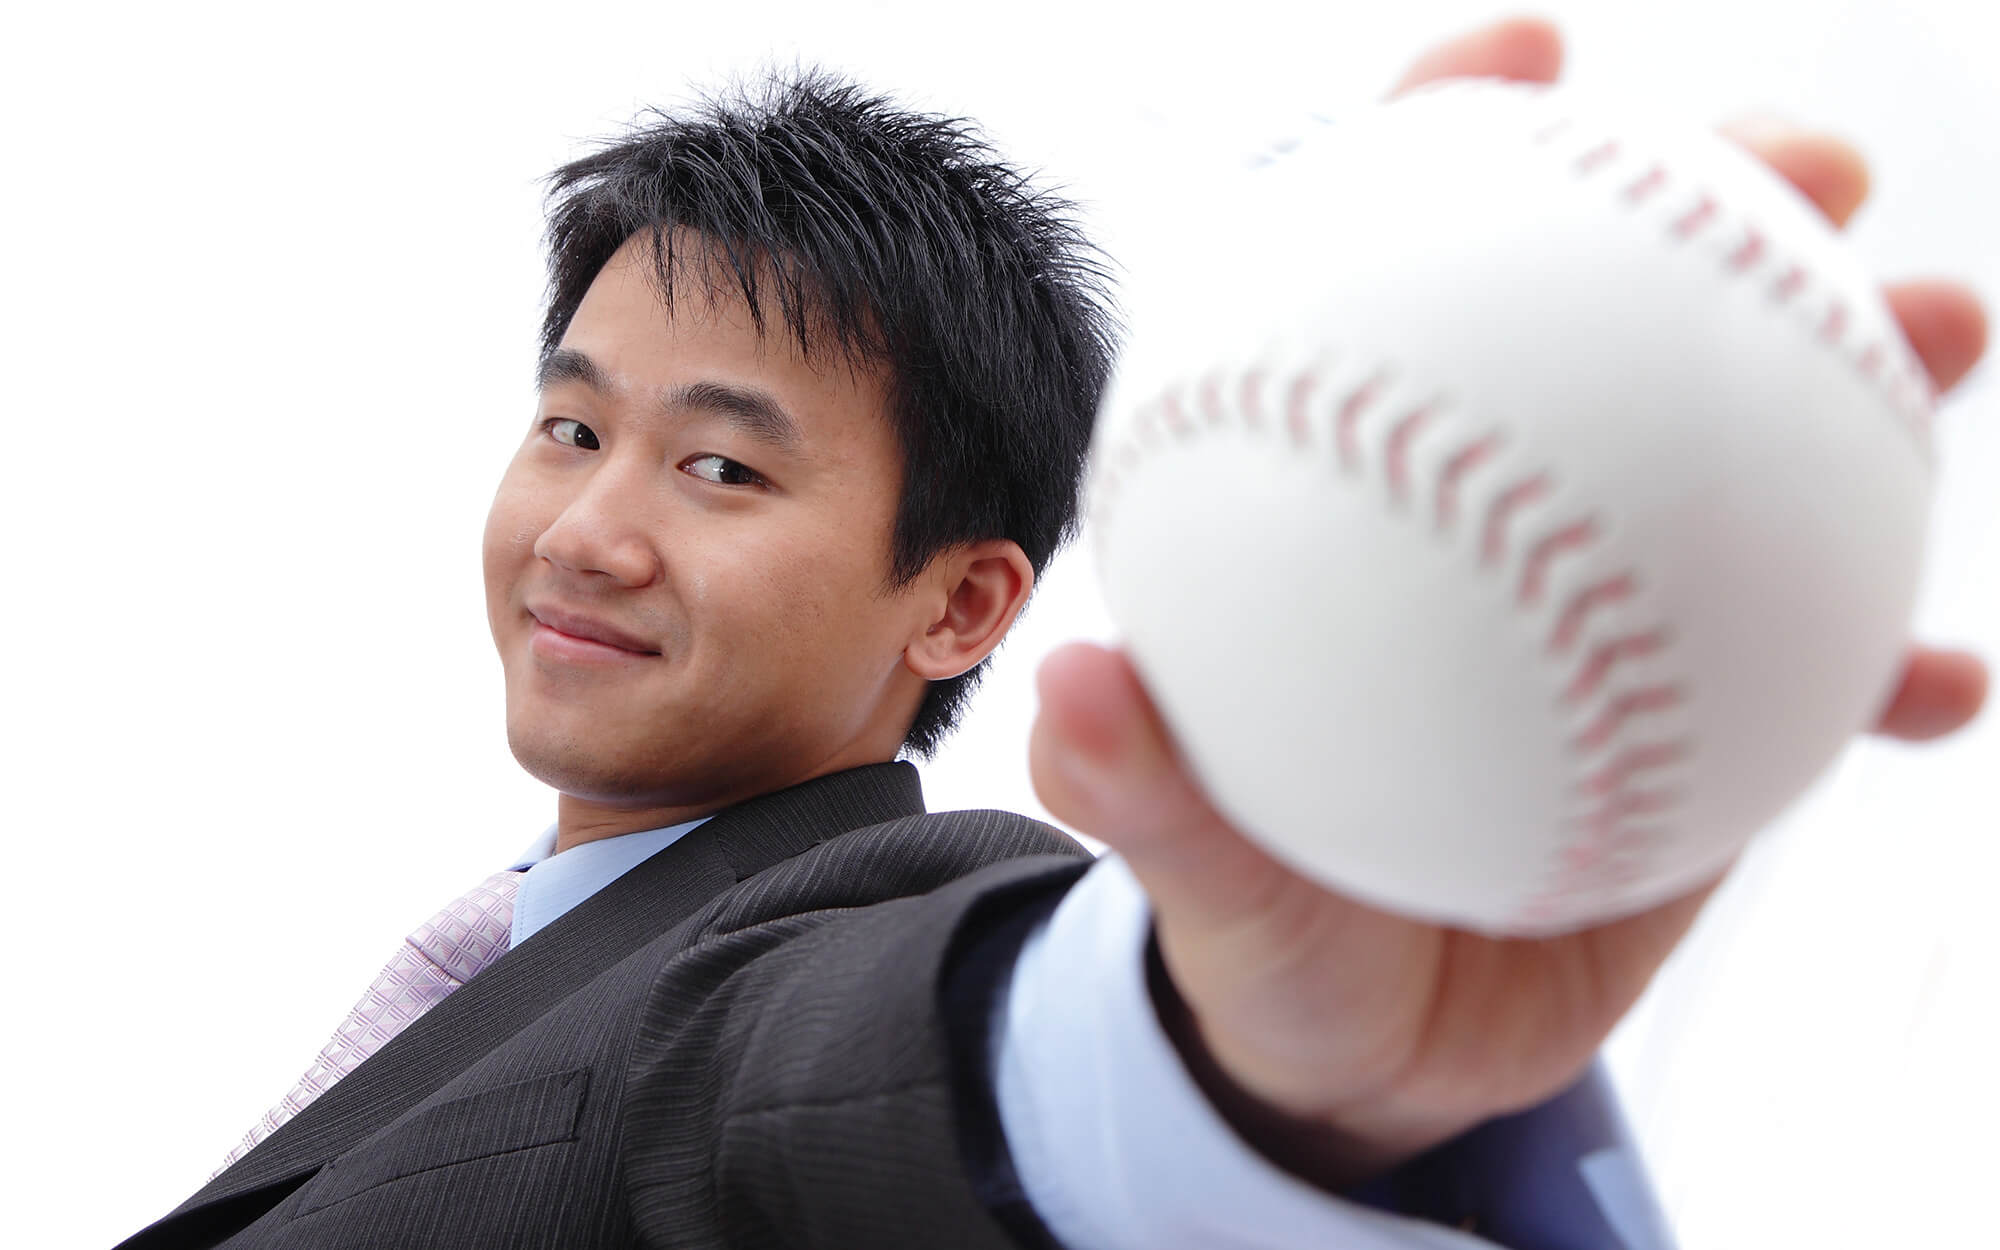 Play Ball Photo Man in suit with baseball